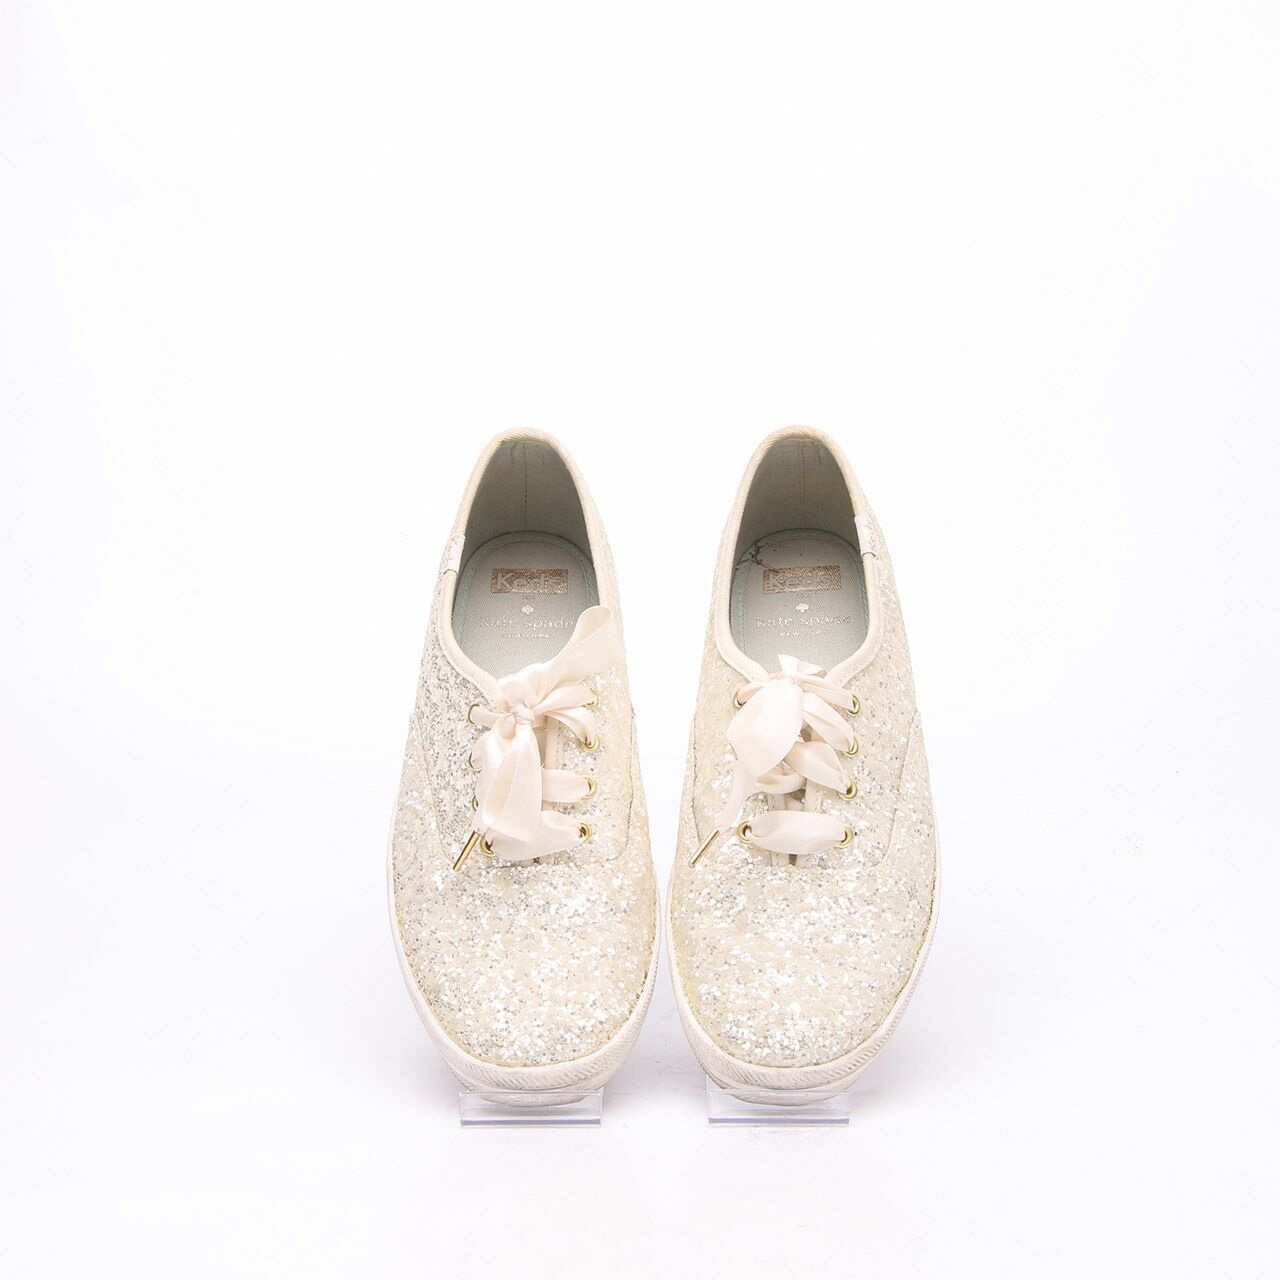 Keds For Kate Spade Off White Glitter Sneakers